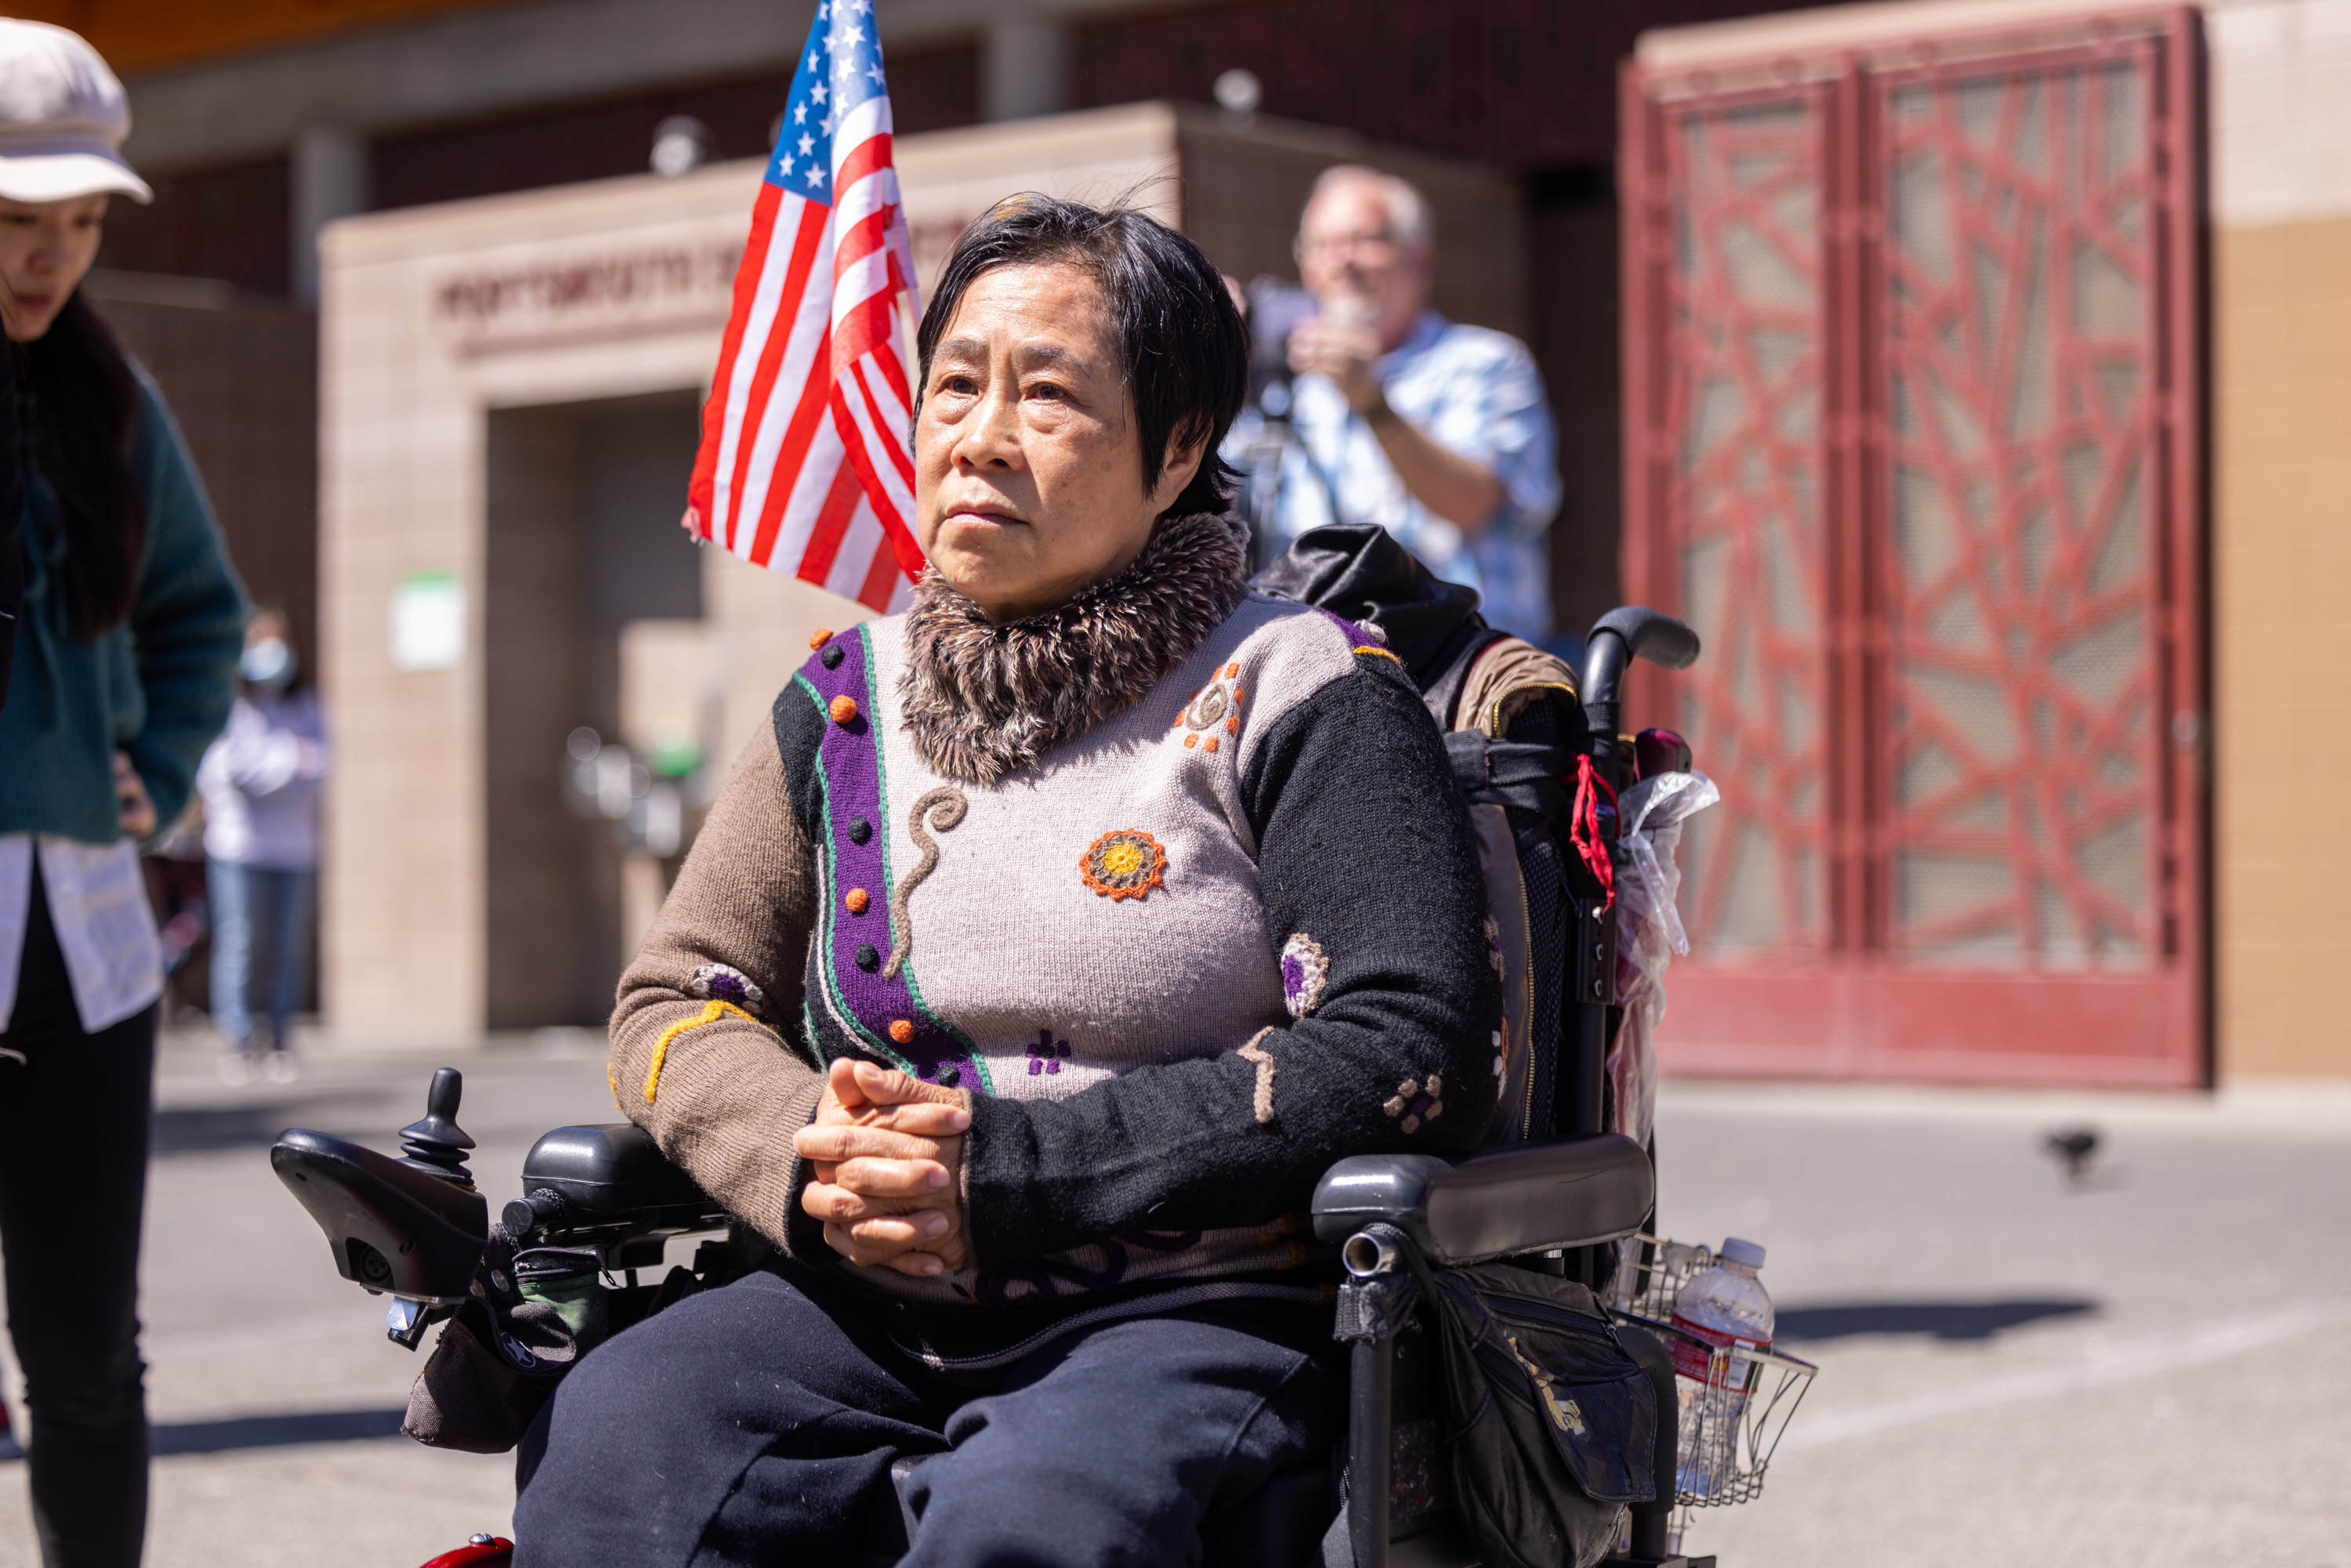 A woman in a colorful sweater sits in a wheelchair displaying an American flag. She is outdoors, flanked by a woman on the left and a man in the background.